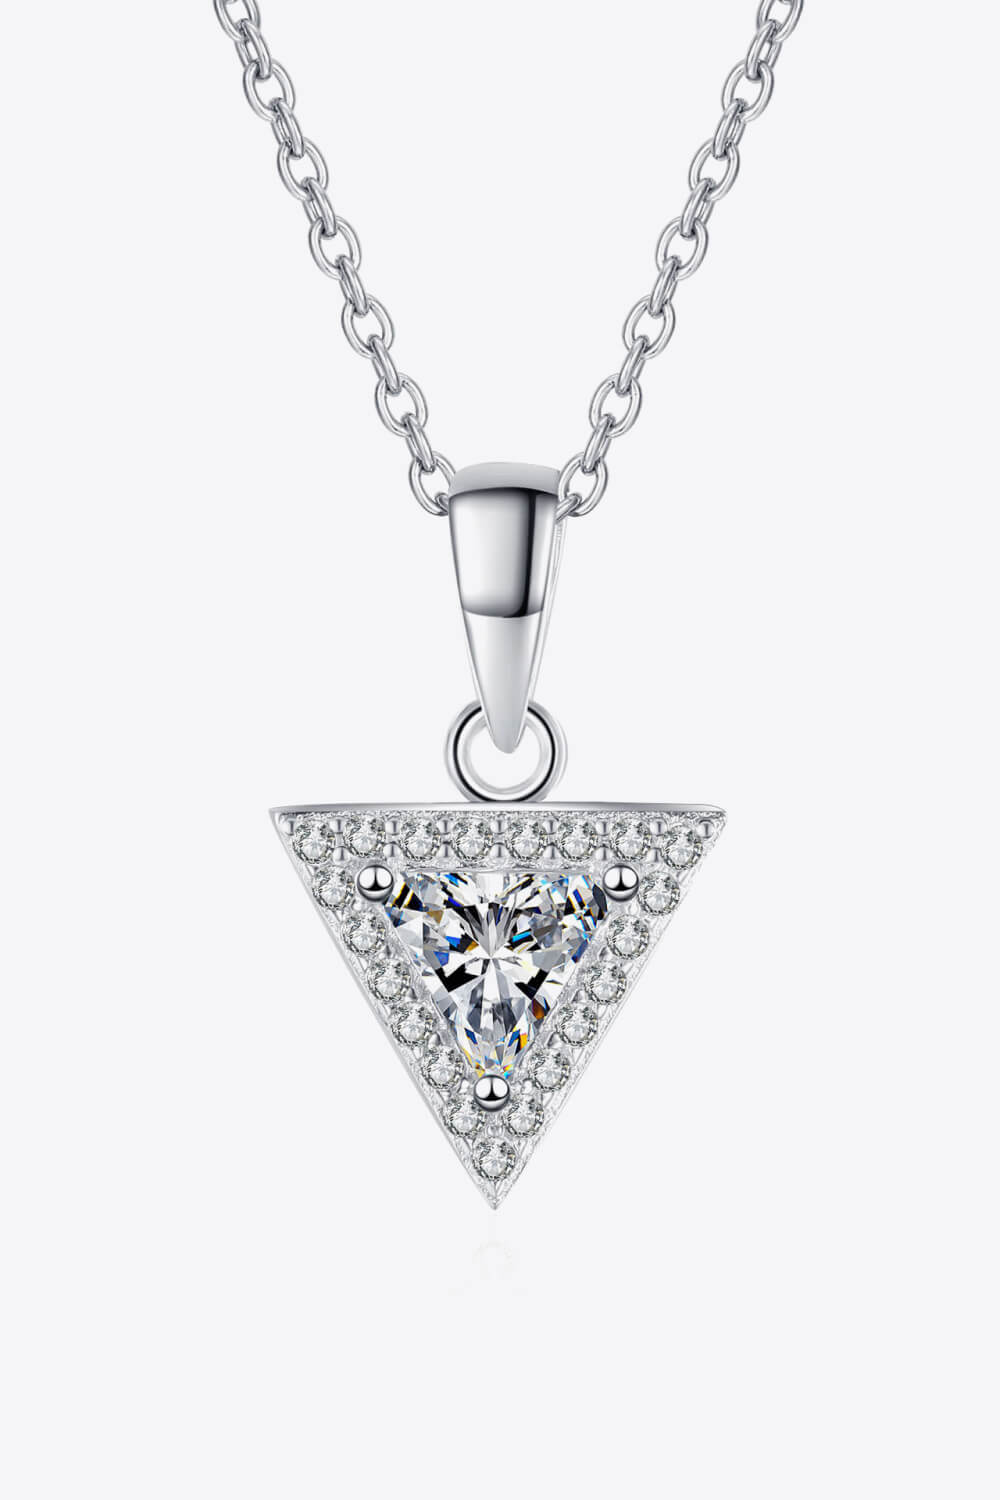 925 Sterling Silver Triangle Moissanite Pendant Necklace-Necklaces-Inspired by Justeen-Women's Clothing Boutique in Chicago, Illinois